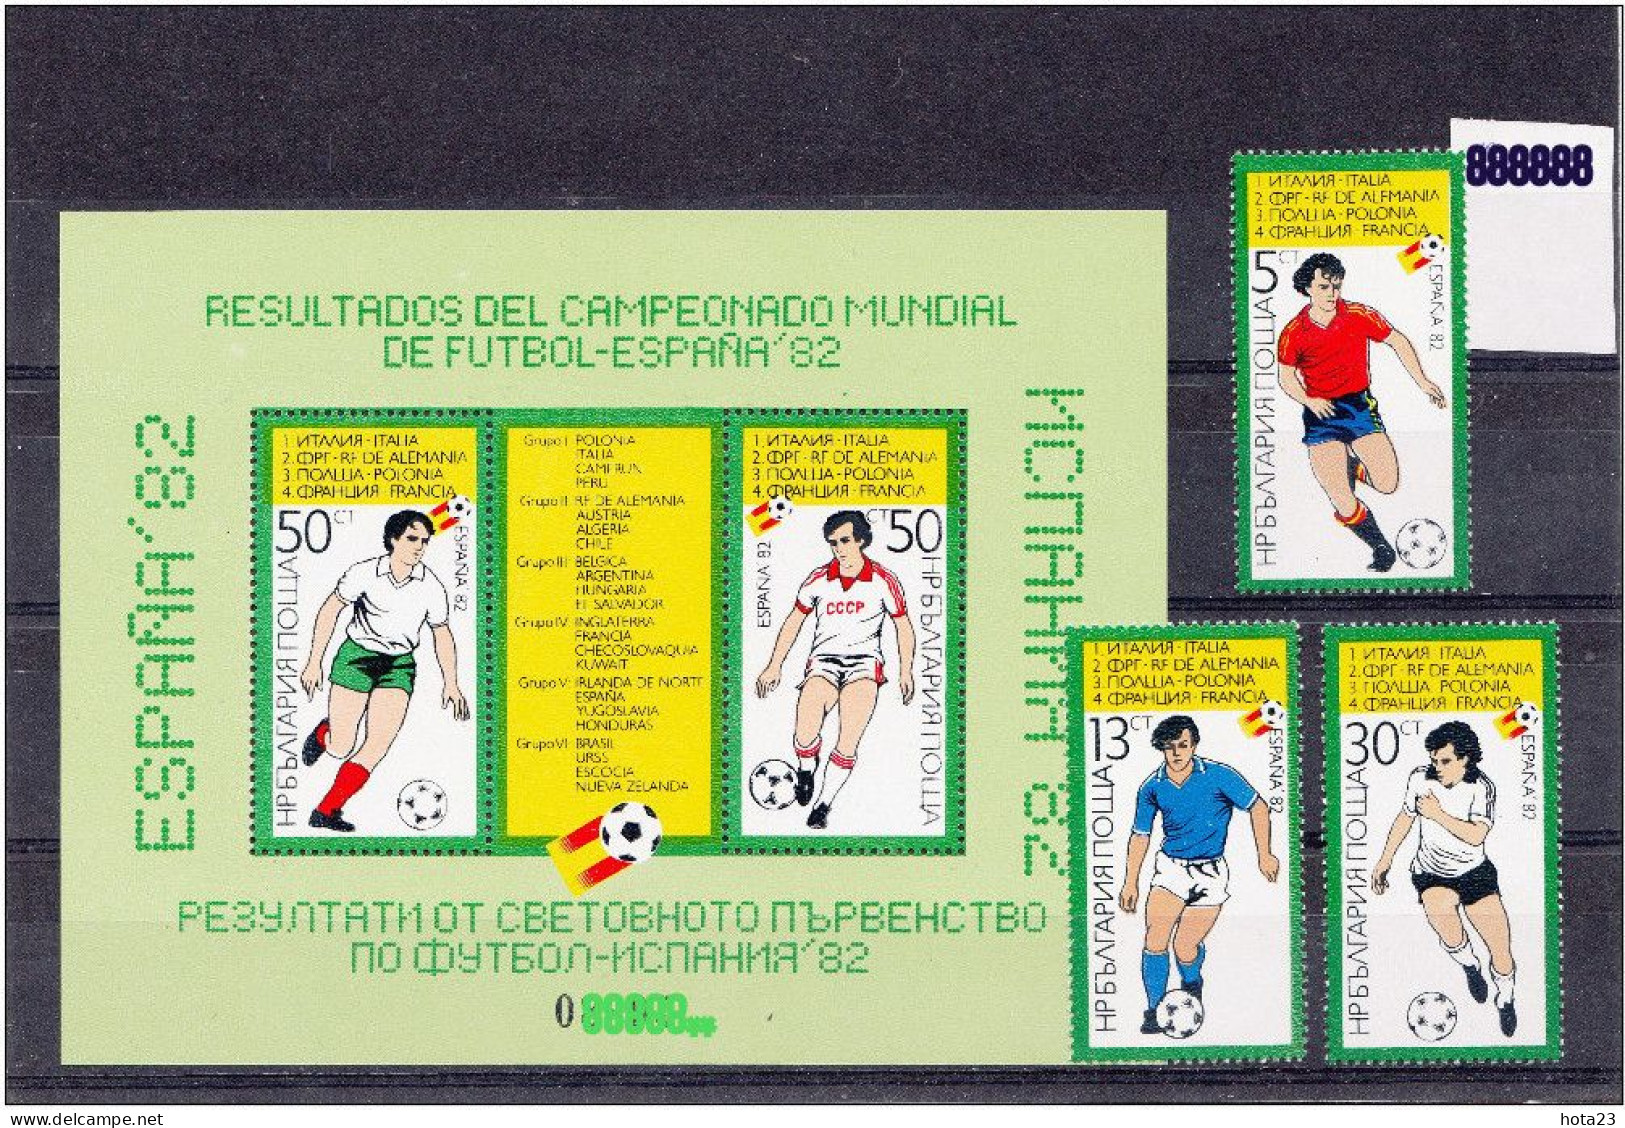 (!) Bulgaria , Spain 1982 World Cup FOOTBALL , SOCER MNH S/S + STAMP SET - 1982 – Spain